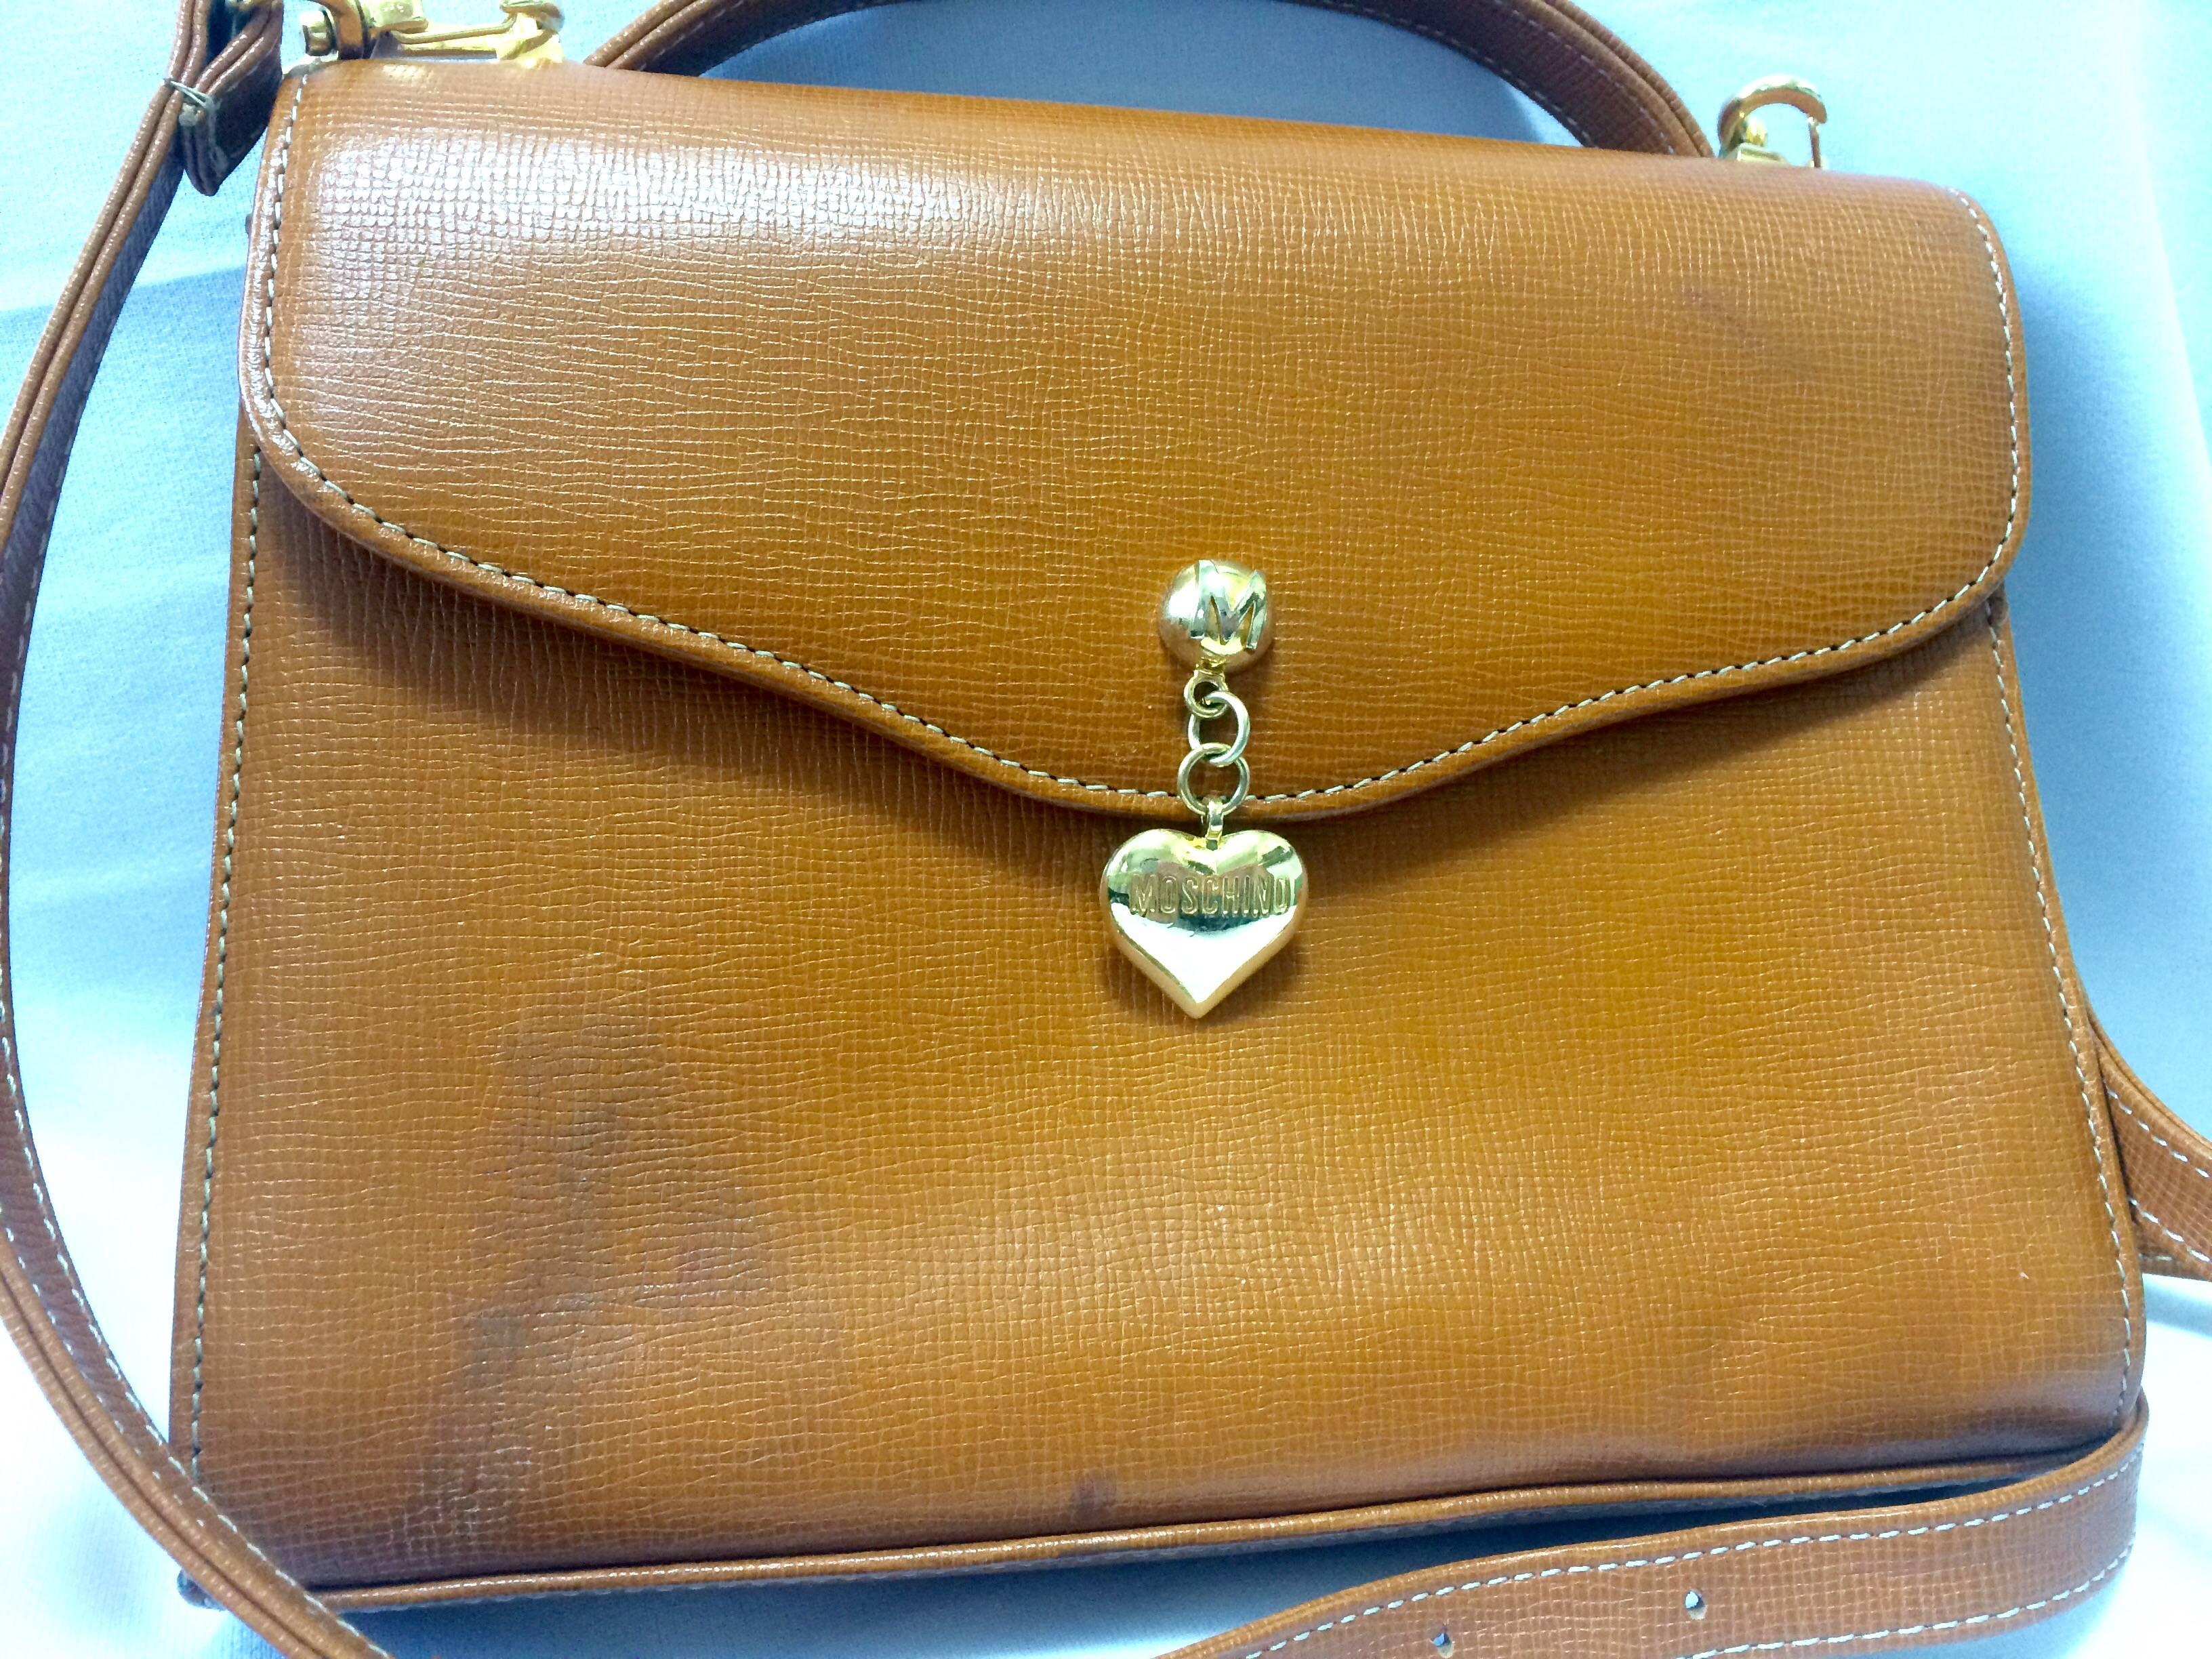 1990s. Vintage MOSCHINO orange brown grained leather kelly handbag with a detachable shoulder strap and golden heart shape logo charm.

Introducing another cute and chic vintage MOSCHINO handbag in orange brown leather bag.
Featuring a golden heart